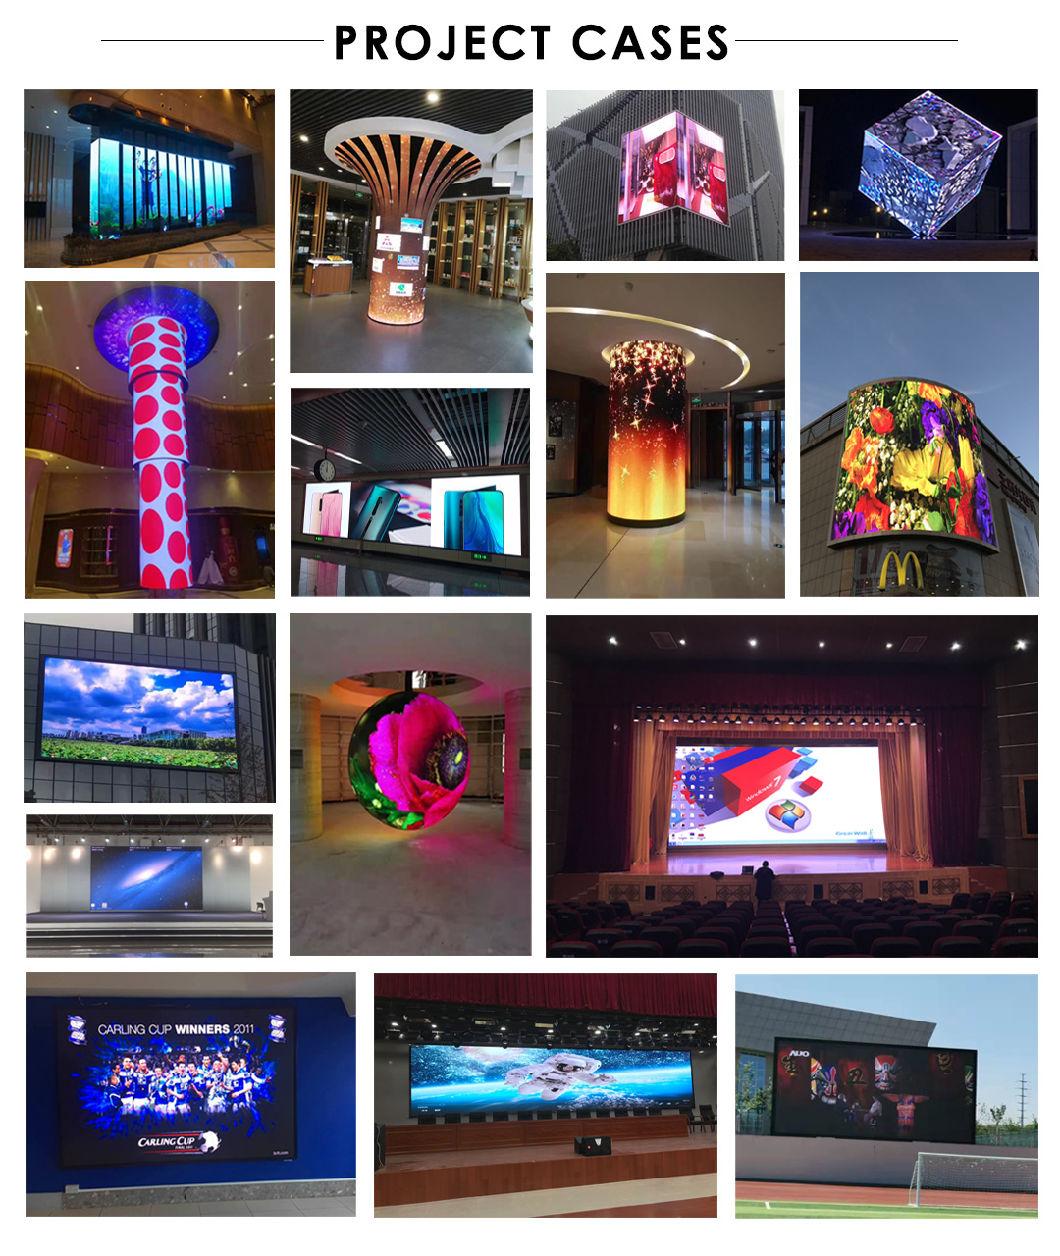 Light Weight Transparent LED Display Full Color Video Screen Wall P3.91-7.81